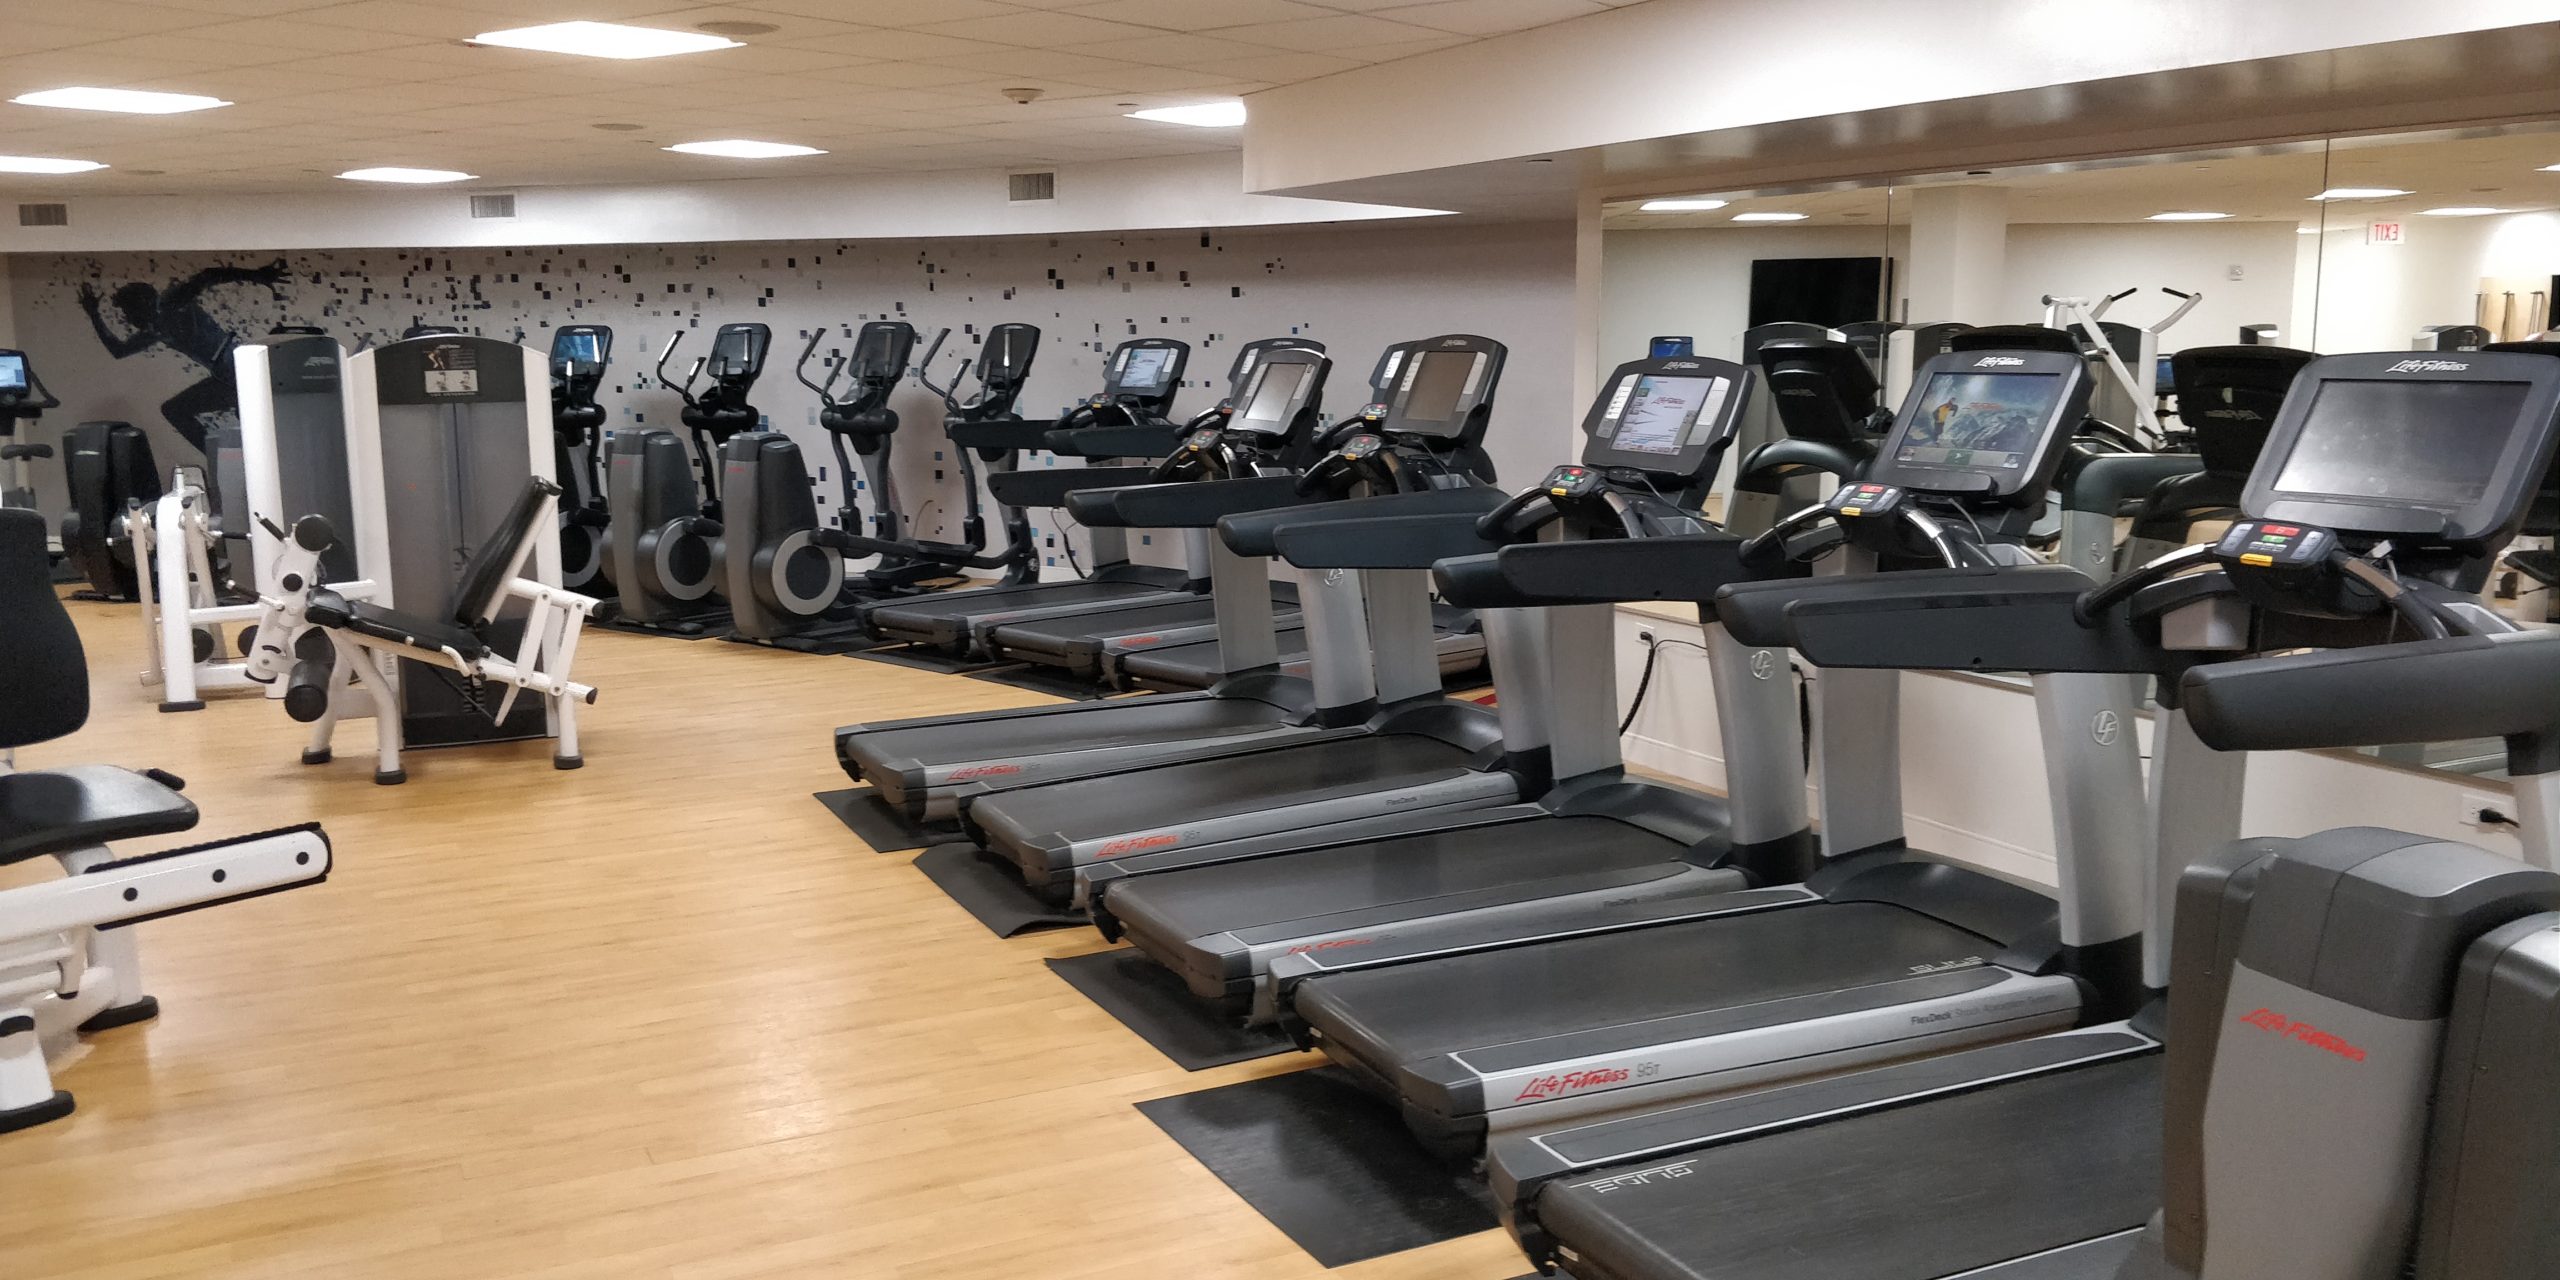 PICTURE OF THE CARDIO EQUIPMENT AT THE SHERATON